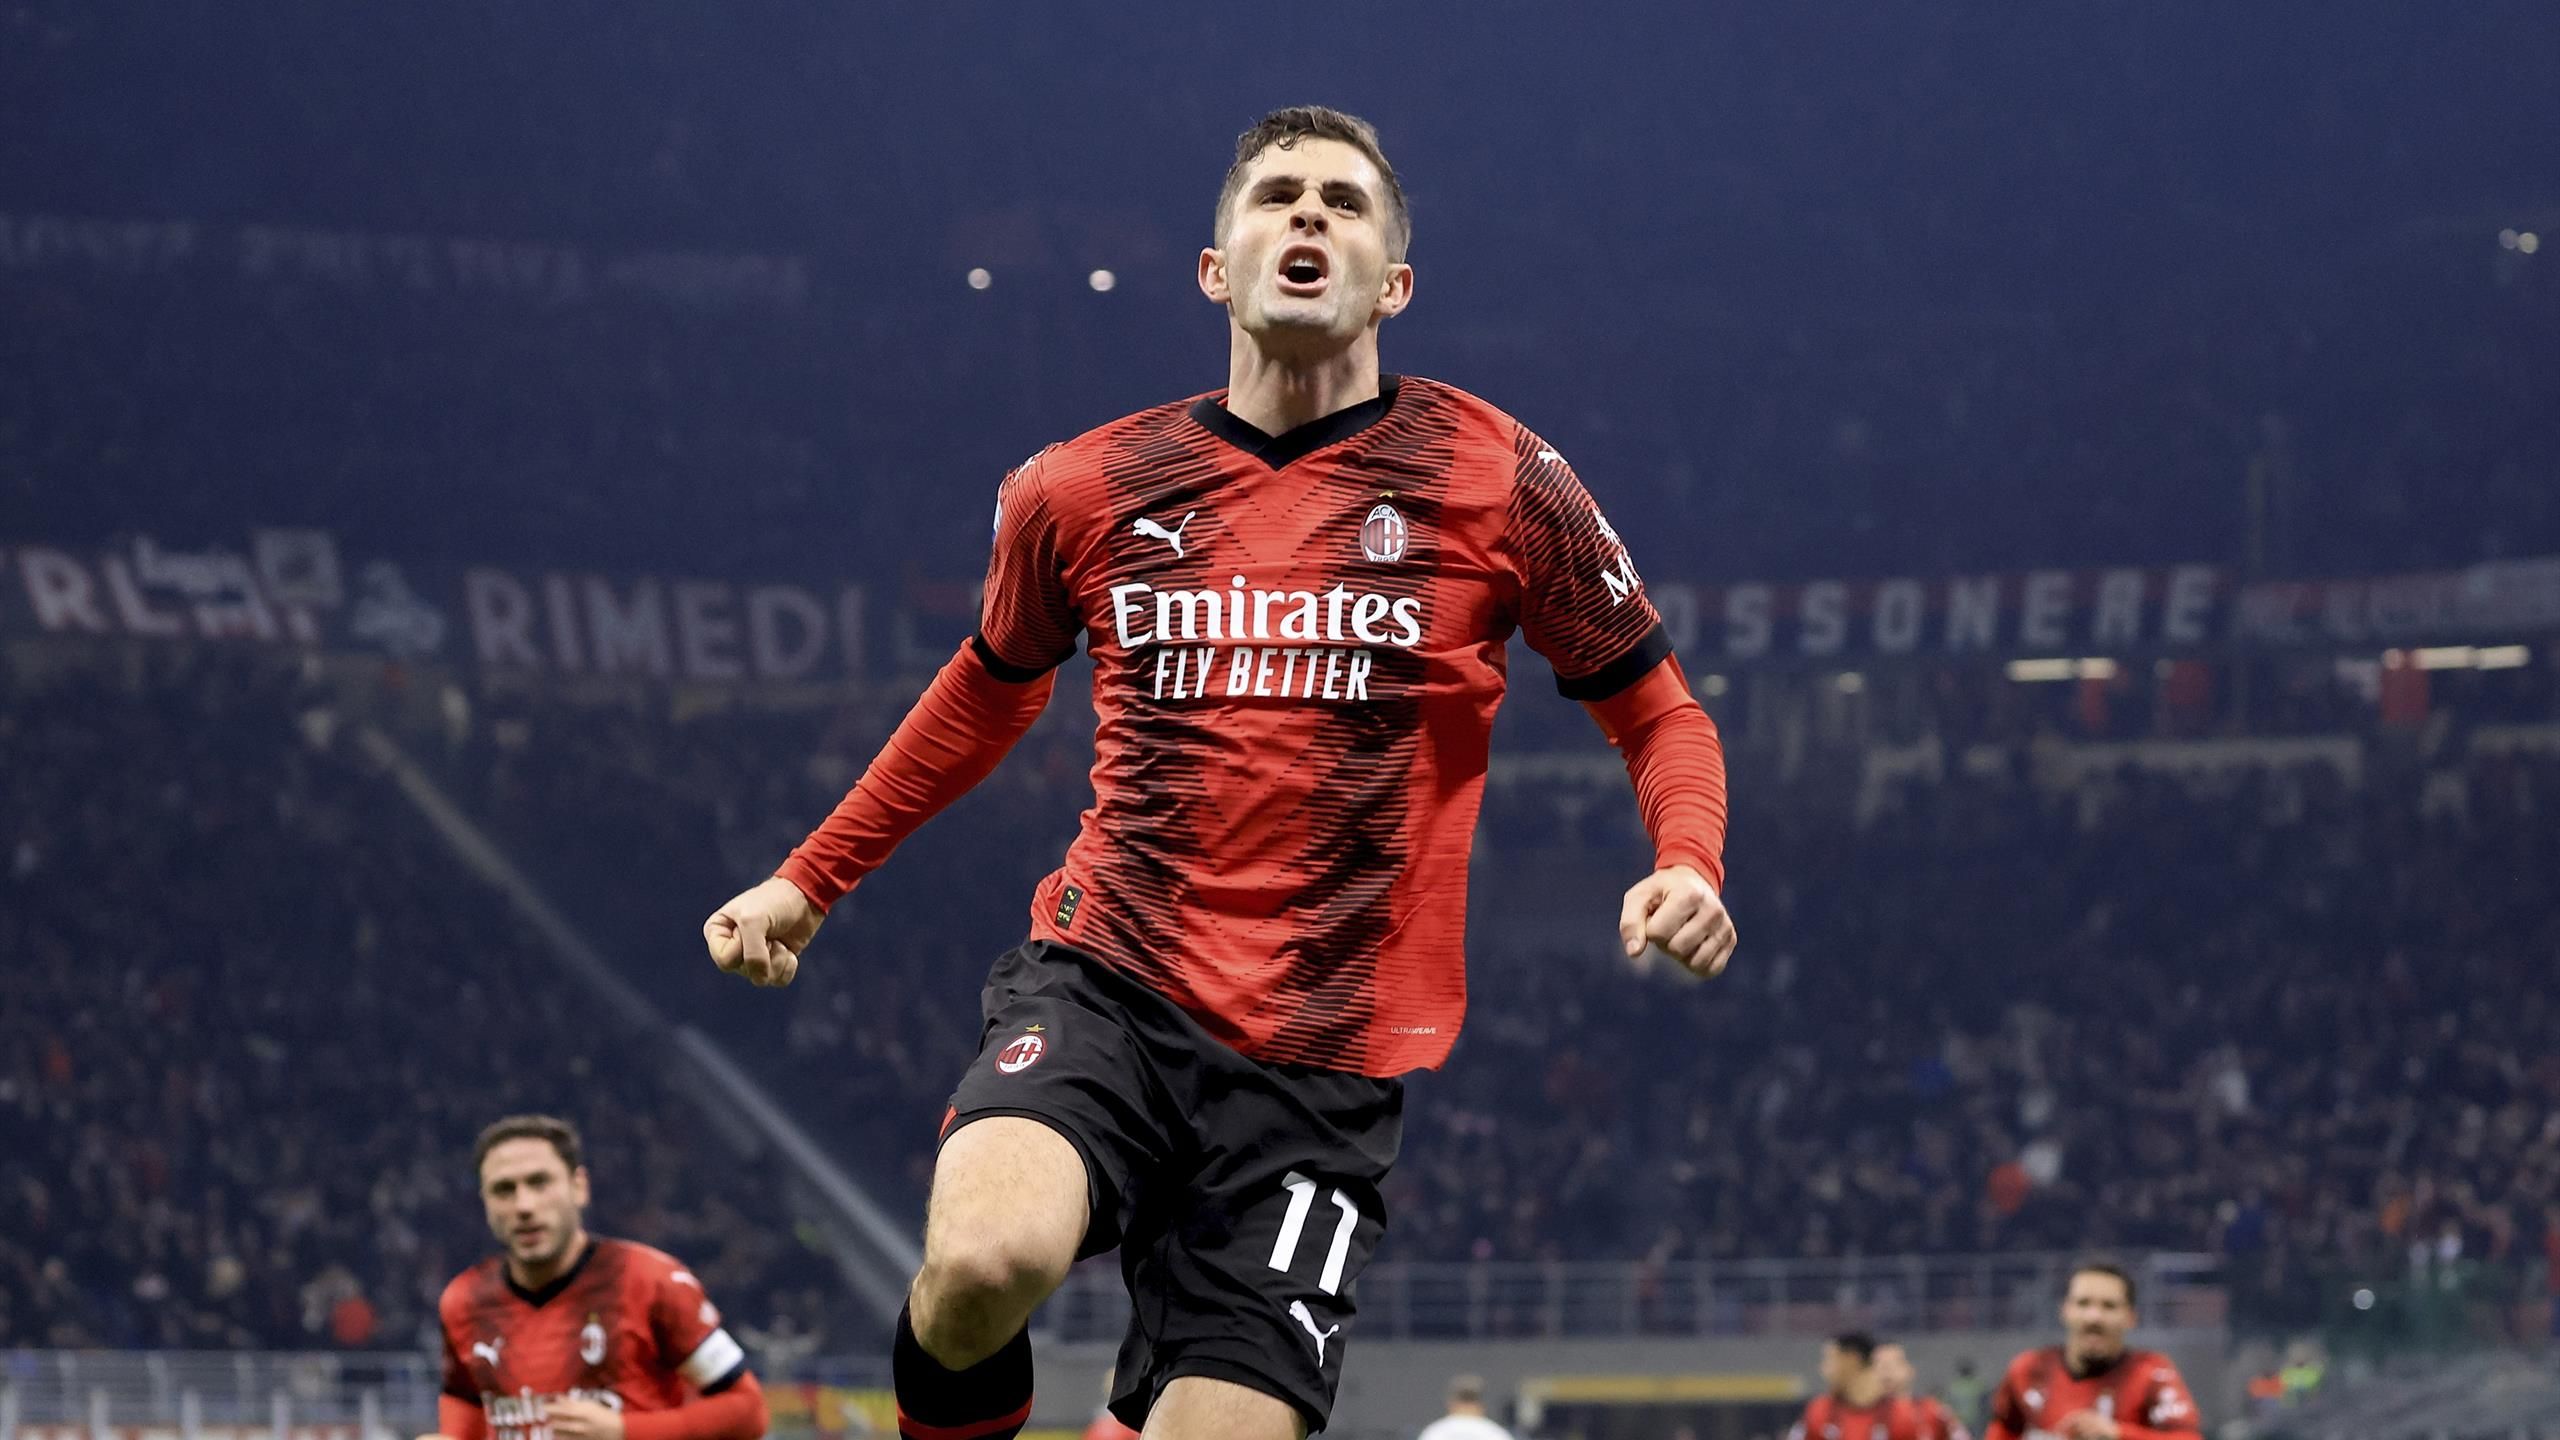 Pulisic earns Milan 1-0 win over Sassuolo